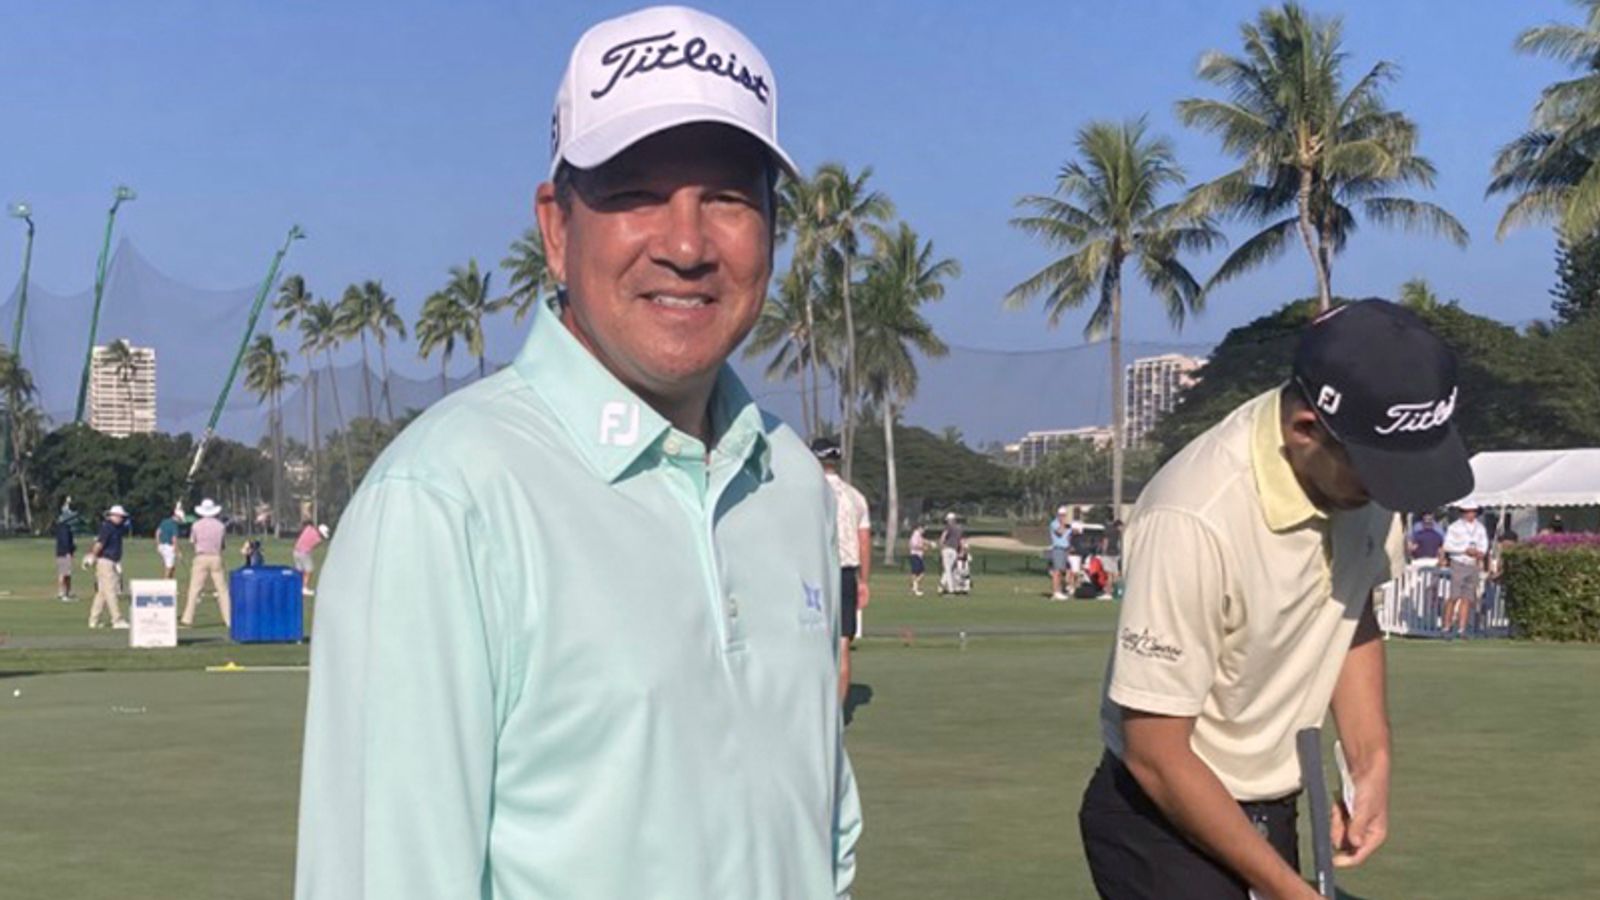 Sony Open: Sixty-year-old most cancers sufferer Michael Castillo makes PGA Tour debut in Hawaii | Golf Information